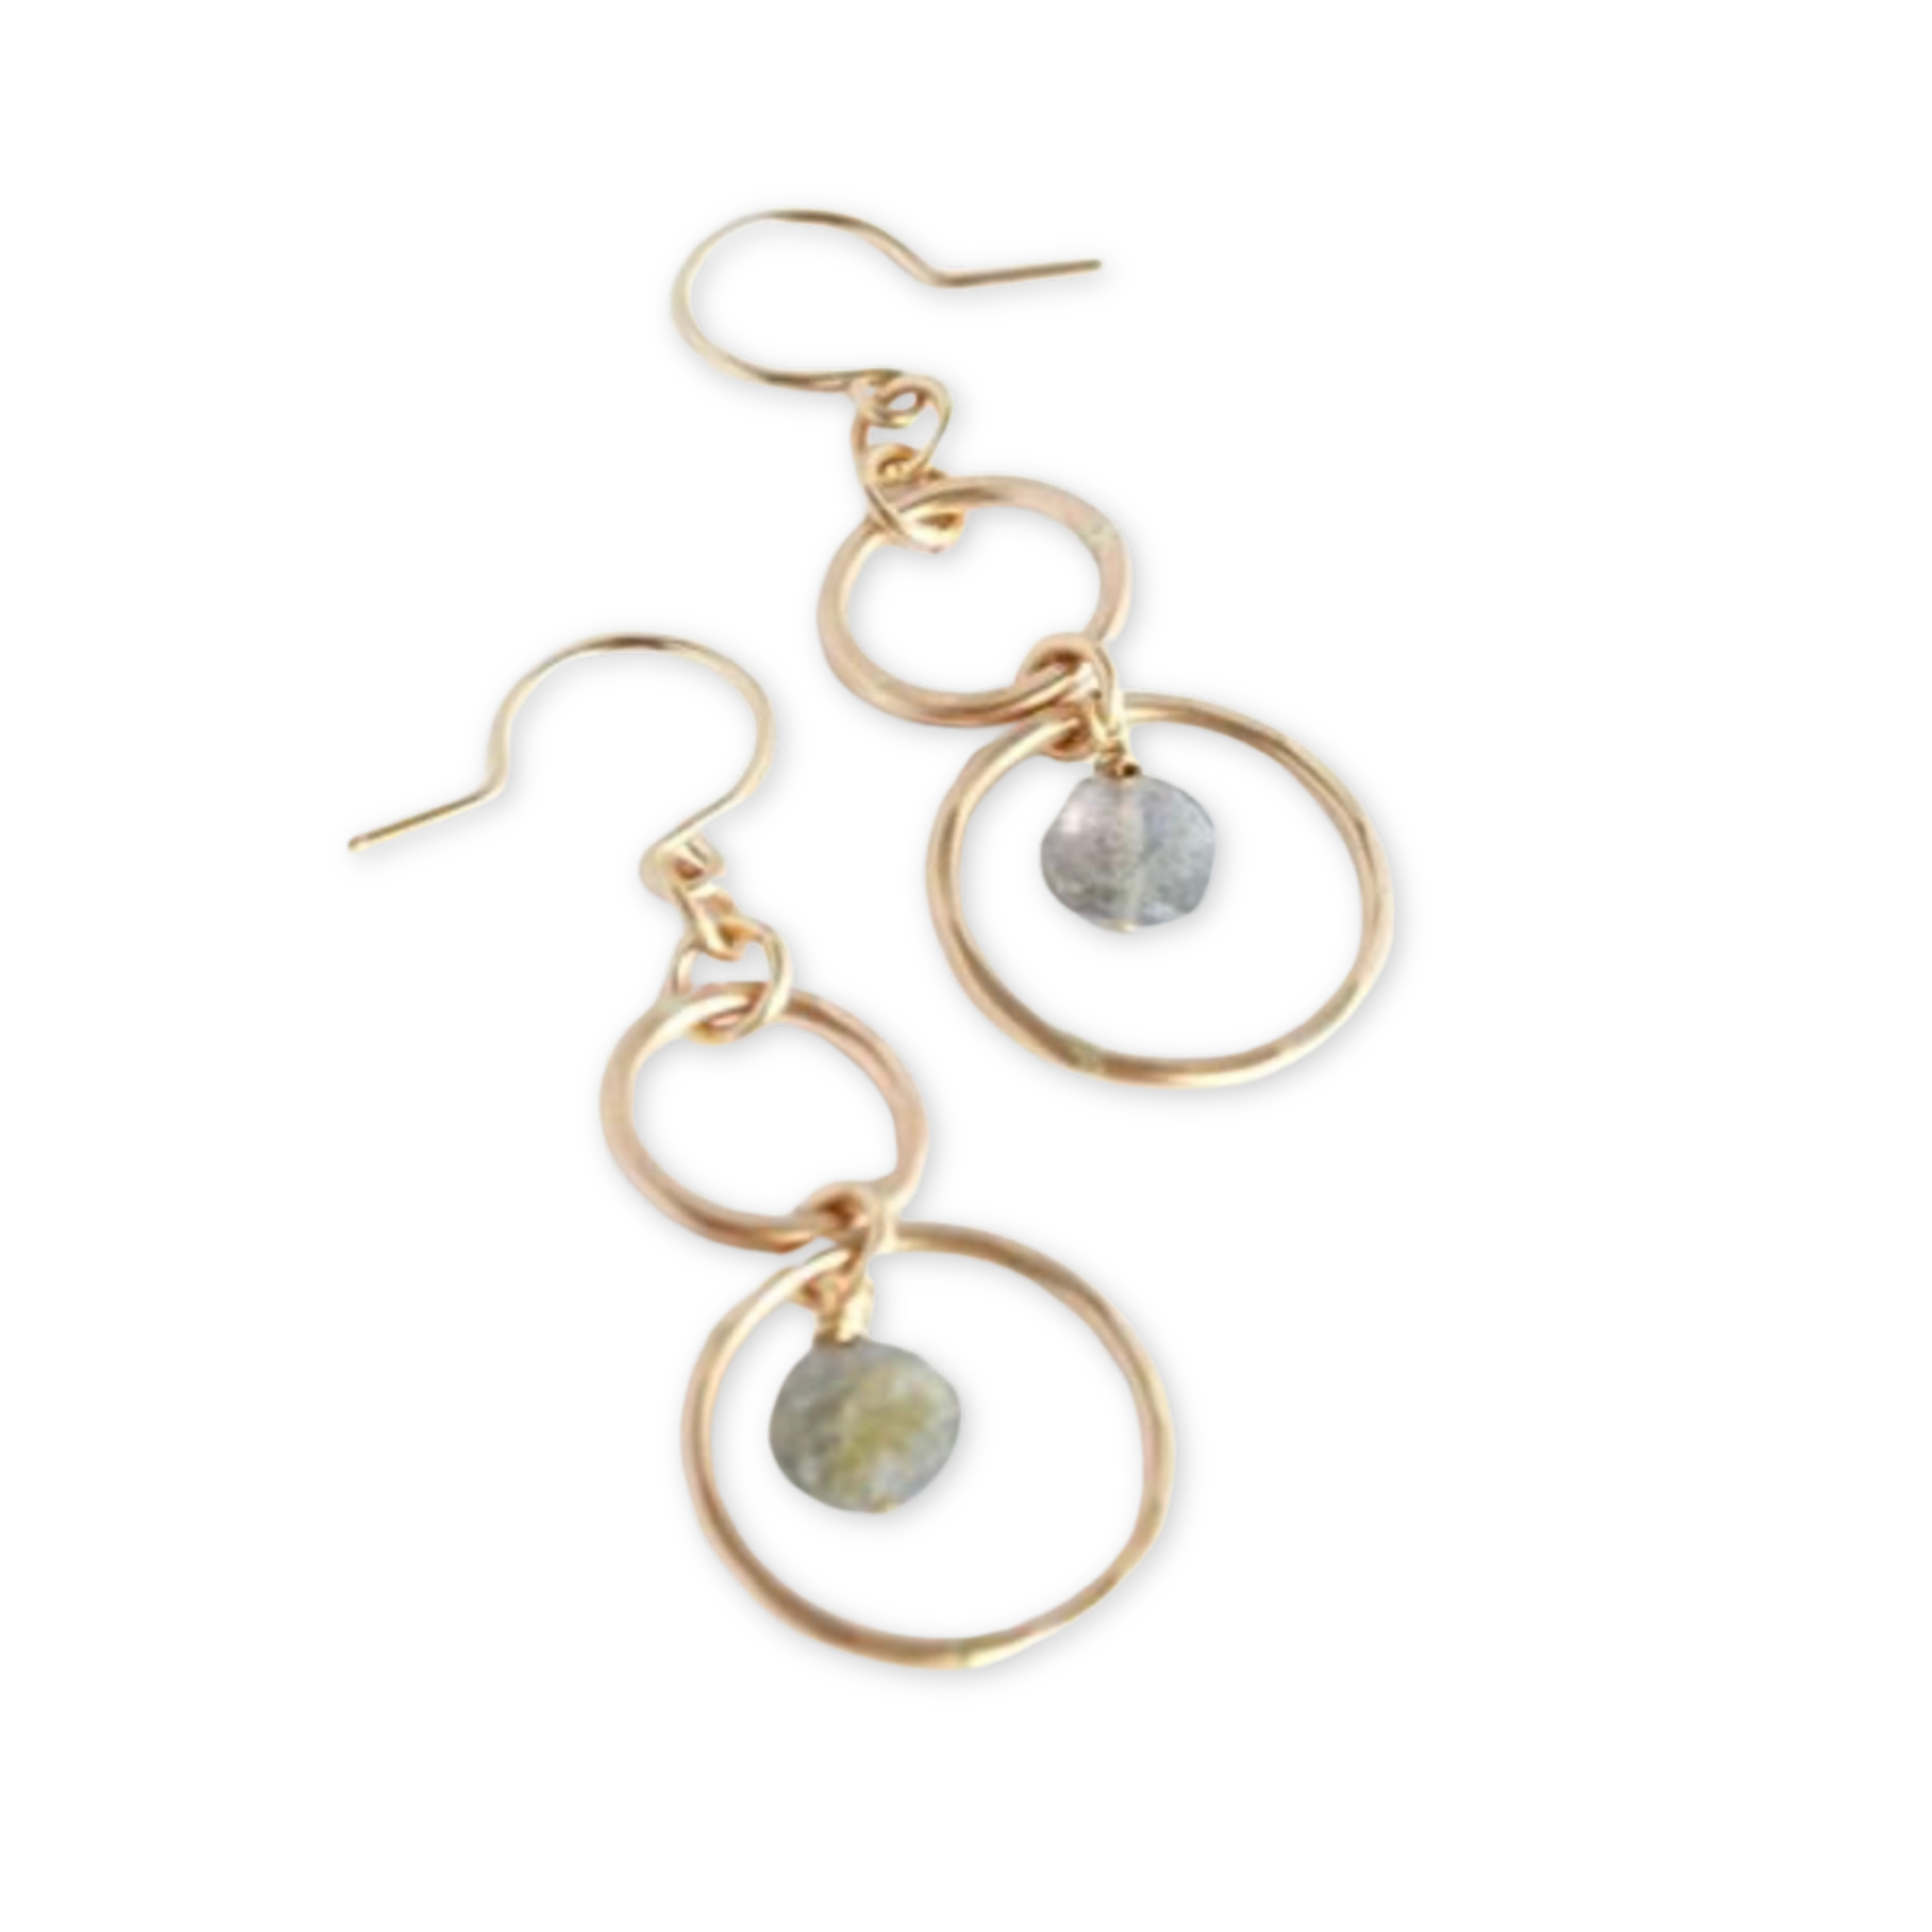 earrings featuring small hammered open circles connected in the middle with a hanging labradorite stone